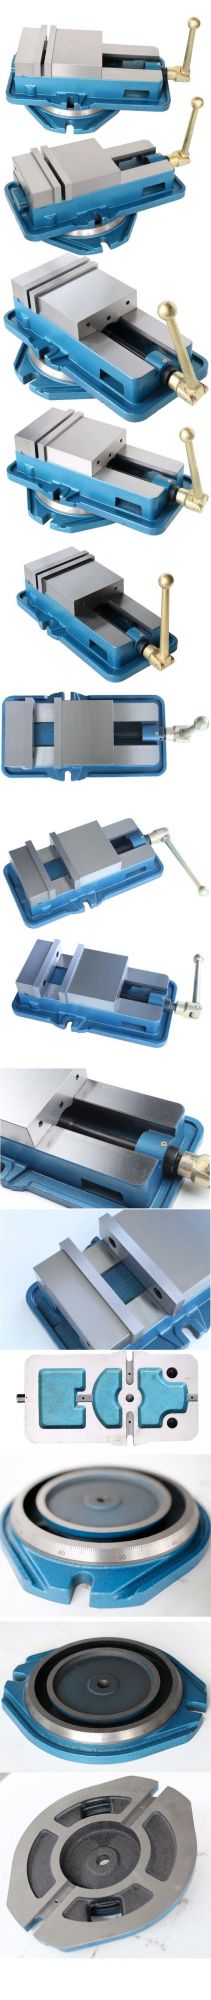 Precision Milling Machine Vise with Accurate Lock Down